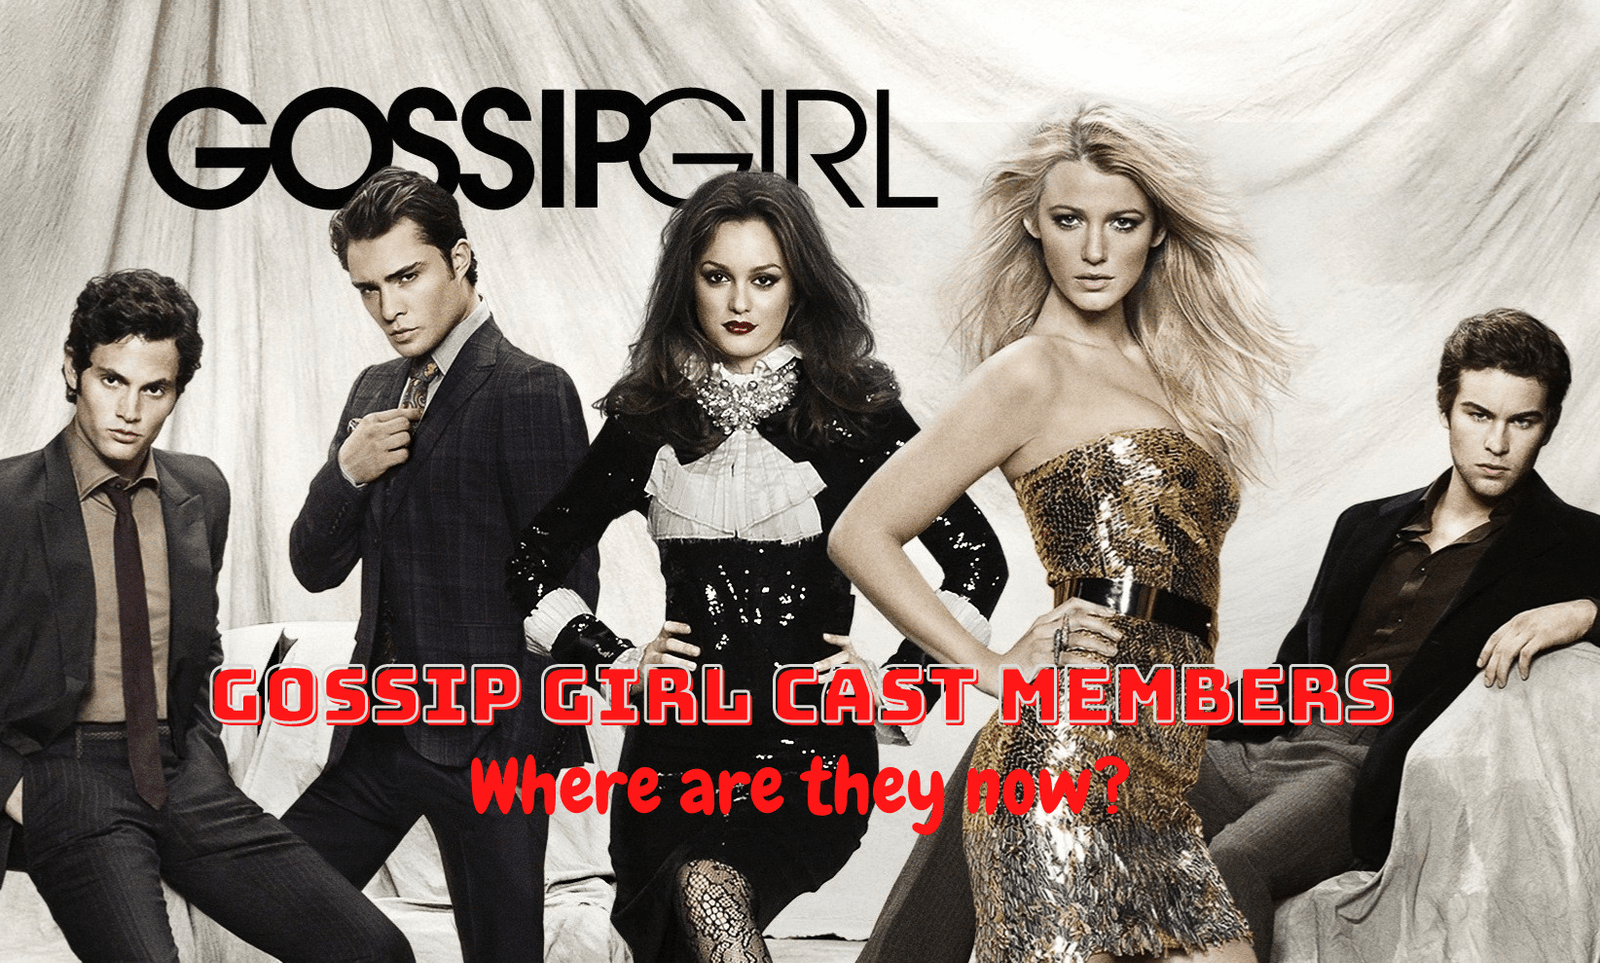 Gossip Girl Cast Members - Where Are They Now?